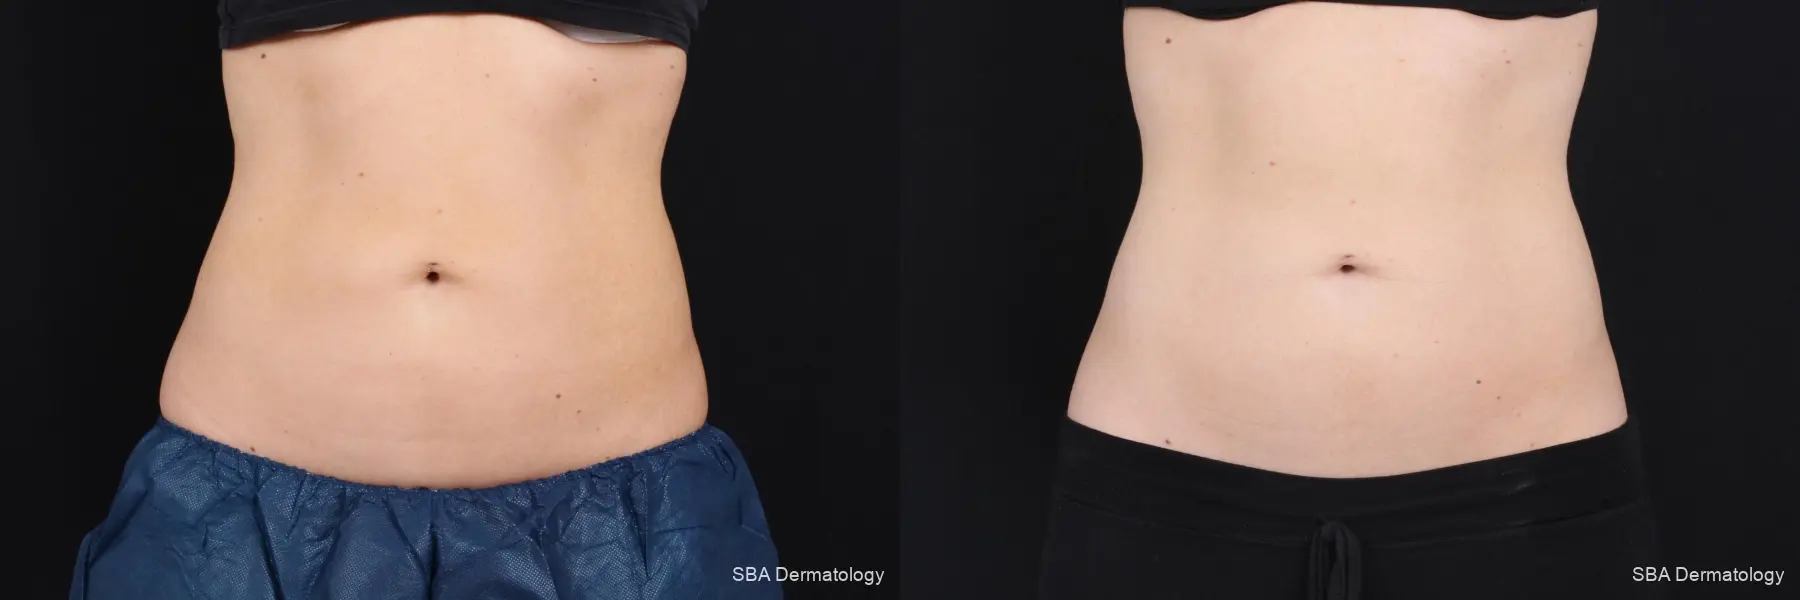 Coolsculpting: Patient 7 - Before and After 1